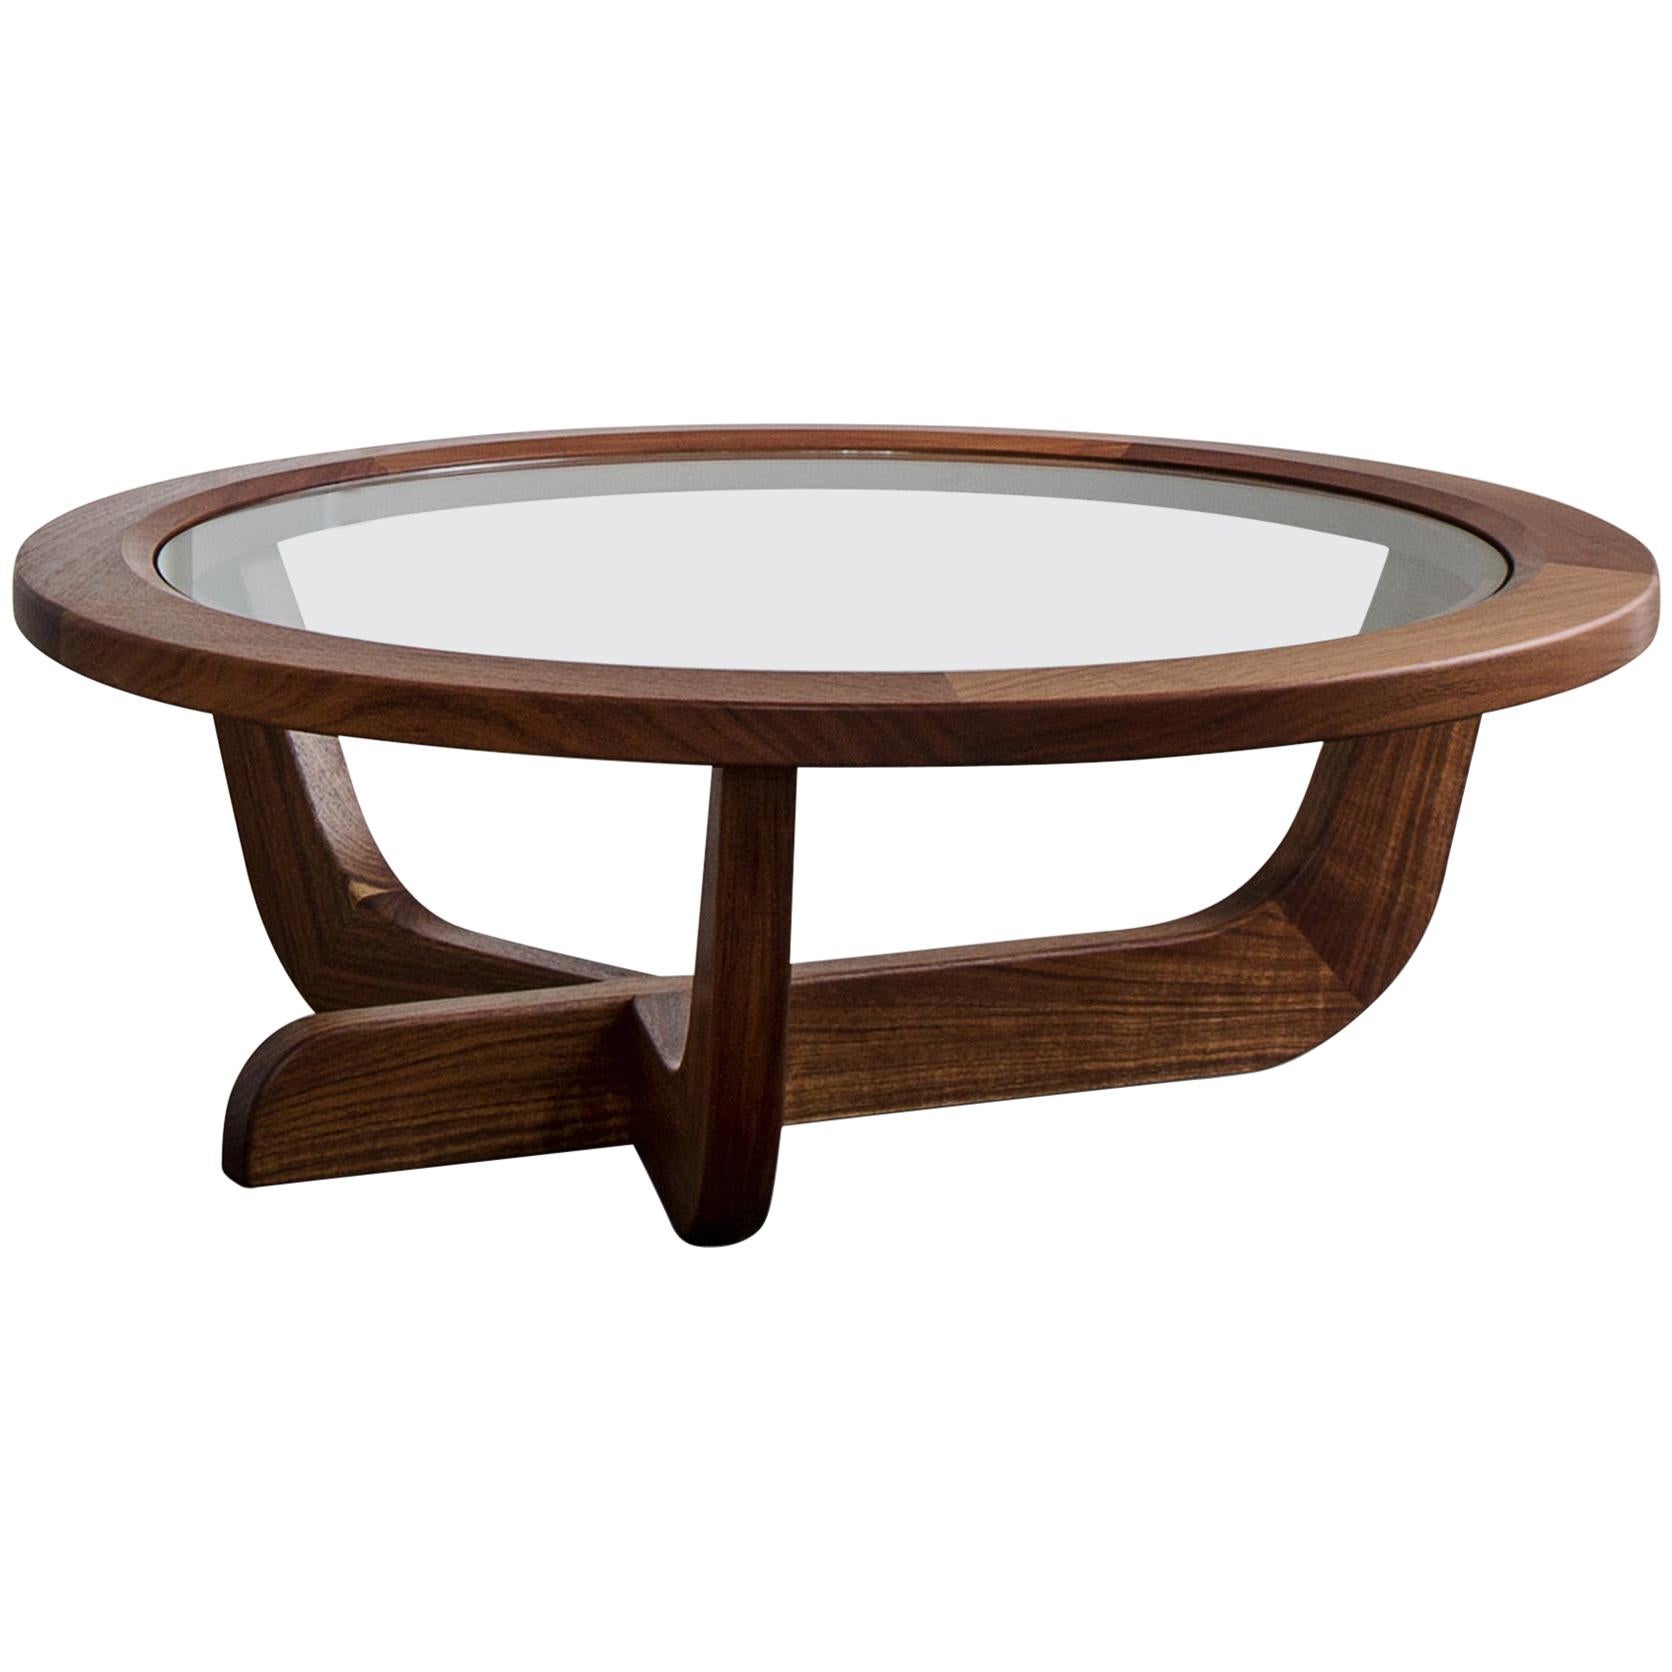 Clara Porset Modernist CP3 Solid Walnut and Glass Coffee Table by Luteca For Sale